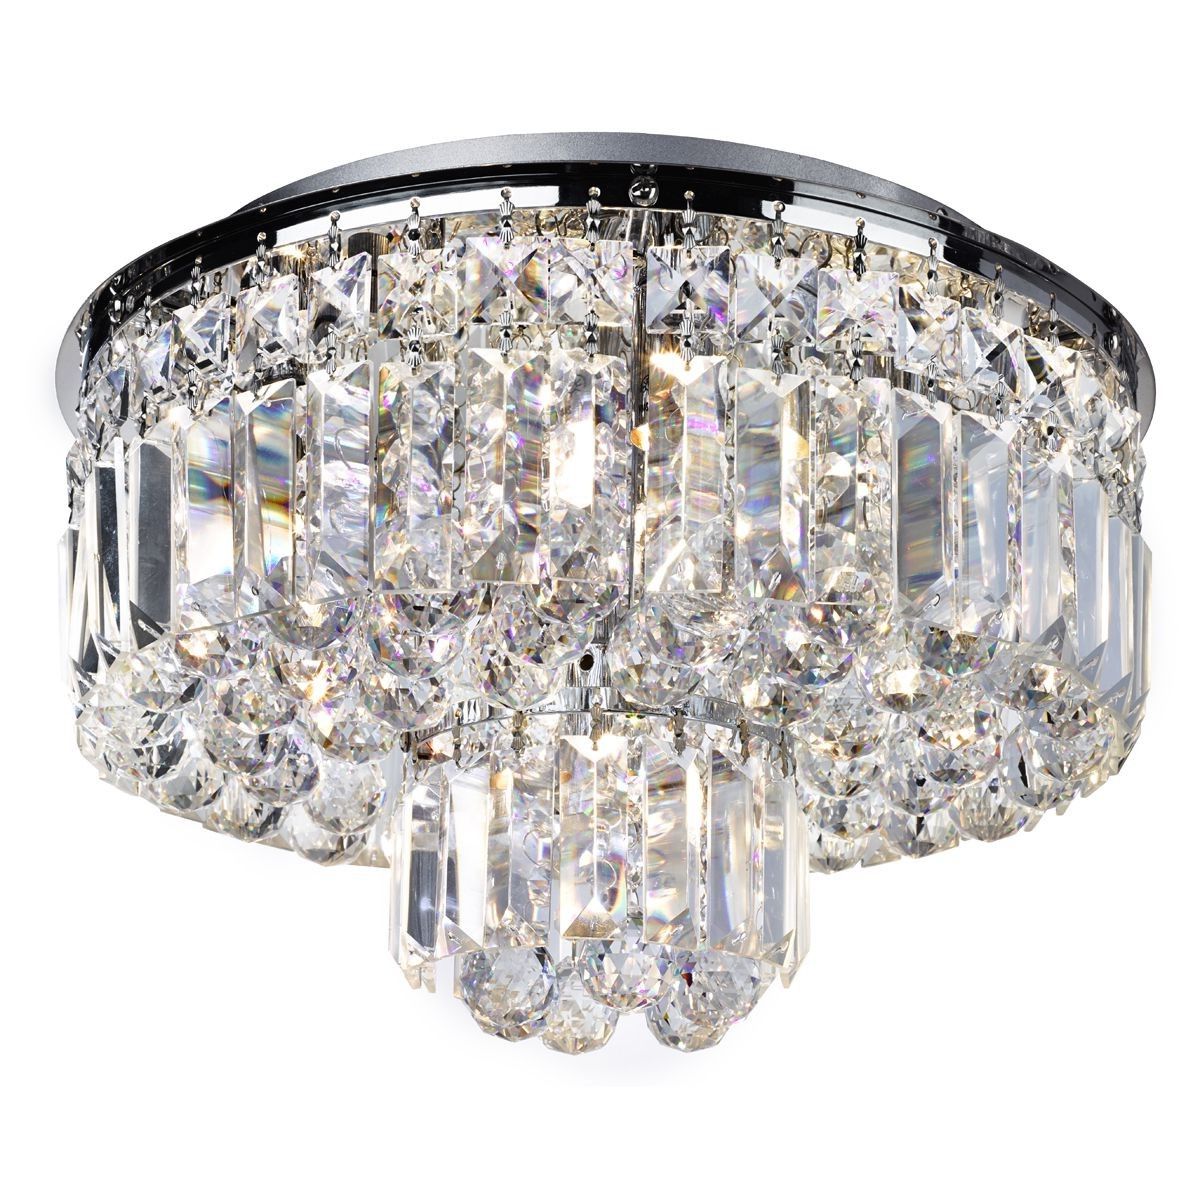 Most Current Chrome And Crystal Pendant Lights With Regard To Vesuvius Crystal Flush Ceiling Light – 5 Light, Chrome (View 4 of 20)